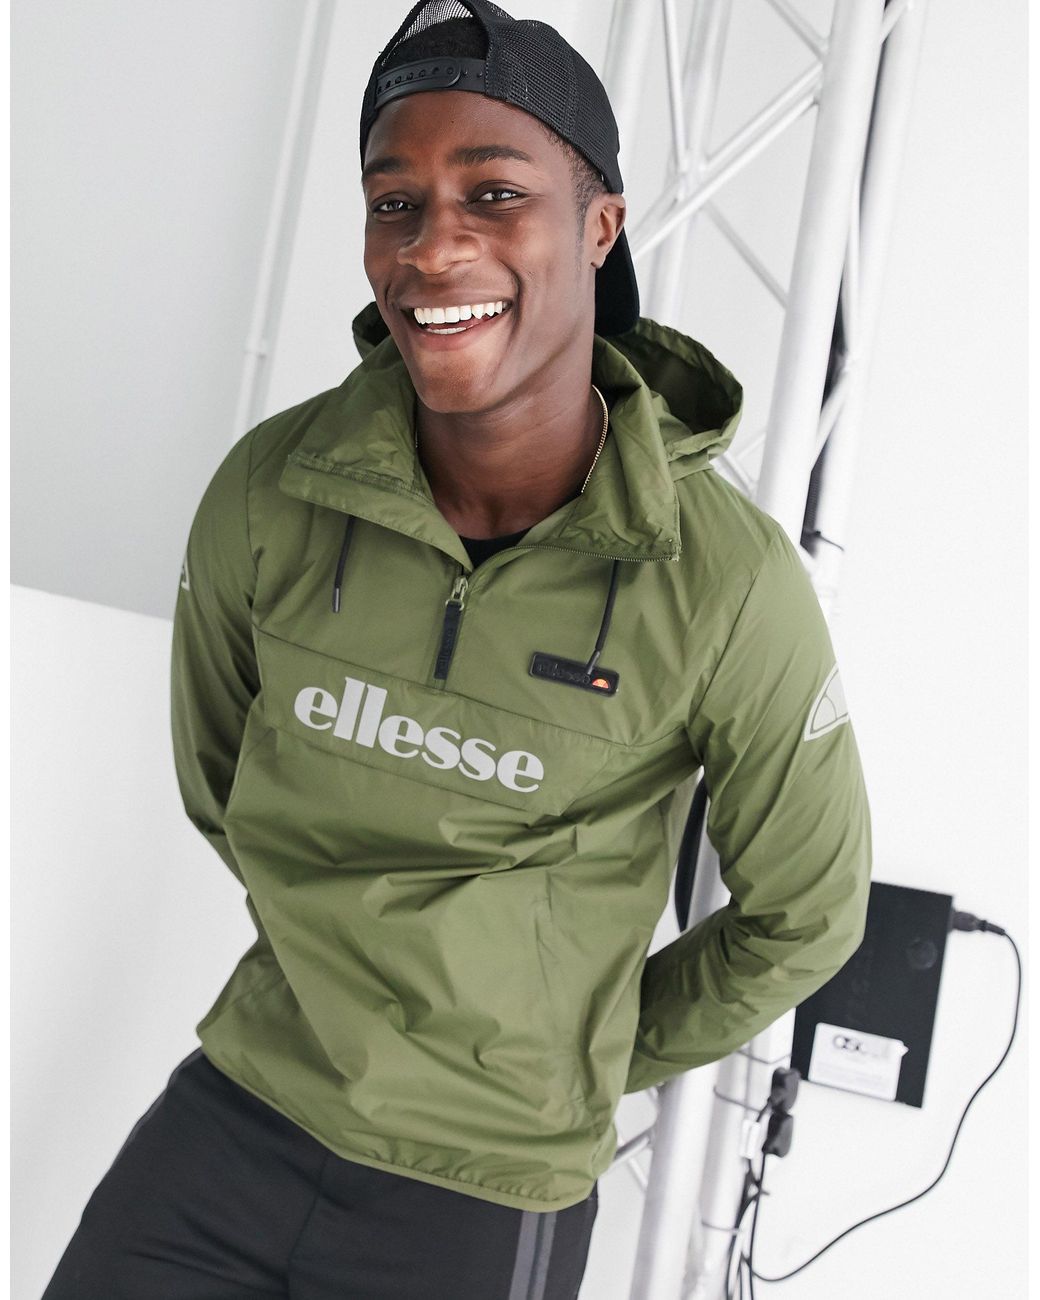 ellesse ion overhead jacket with reflective logo in black